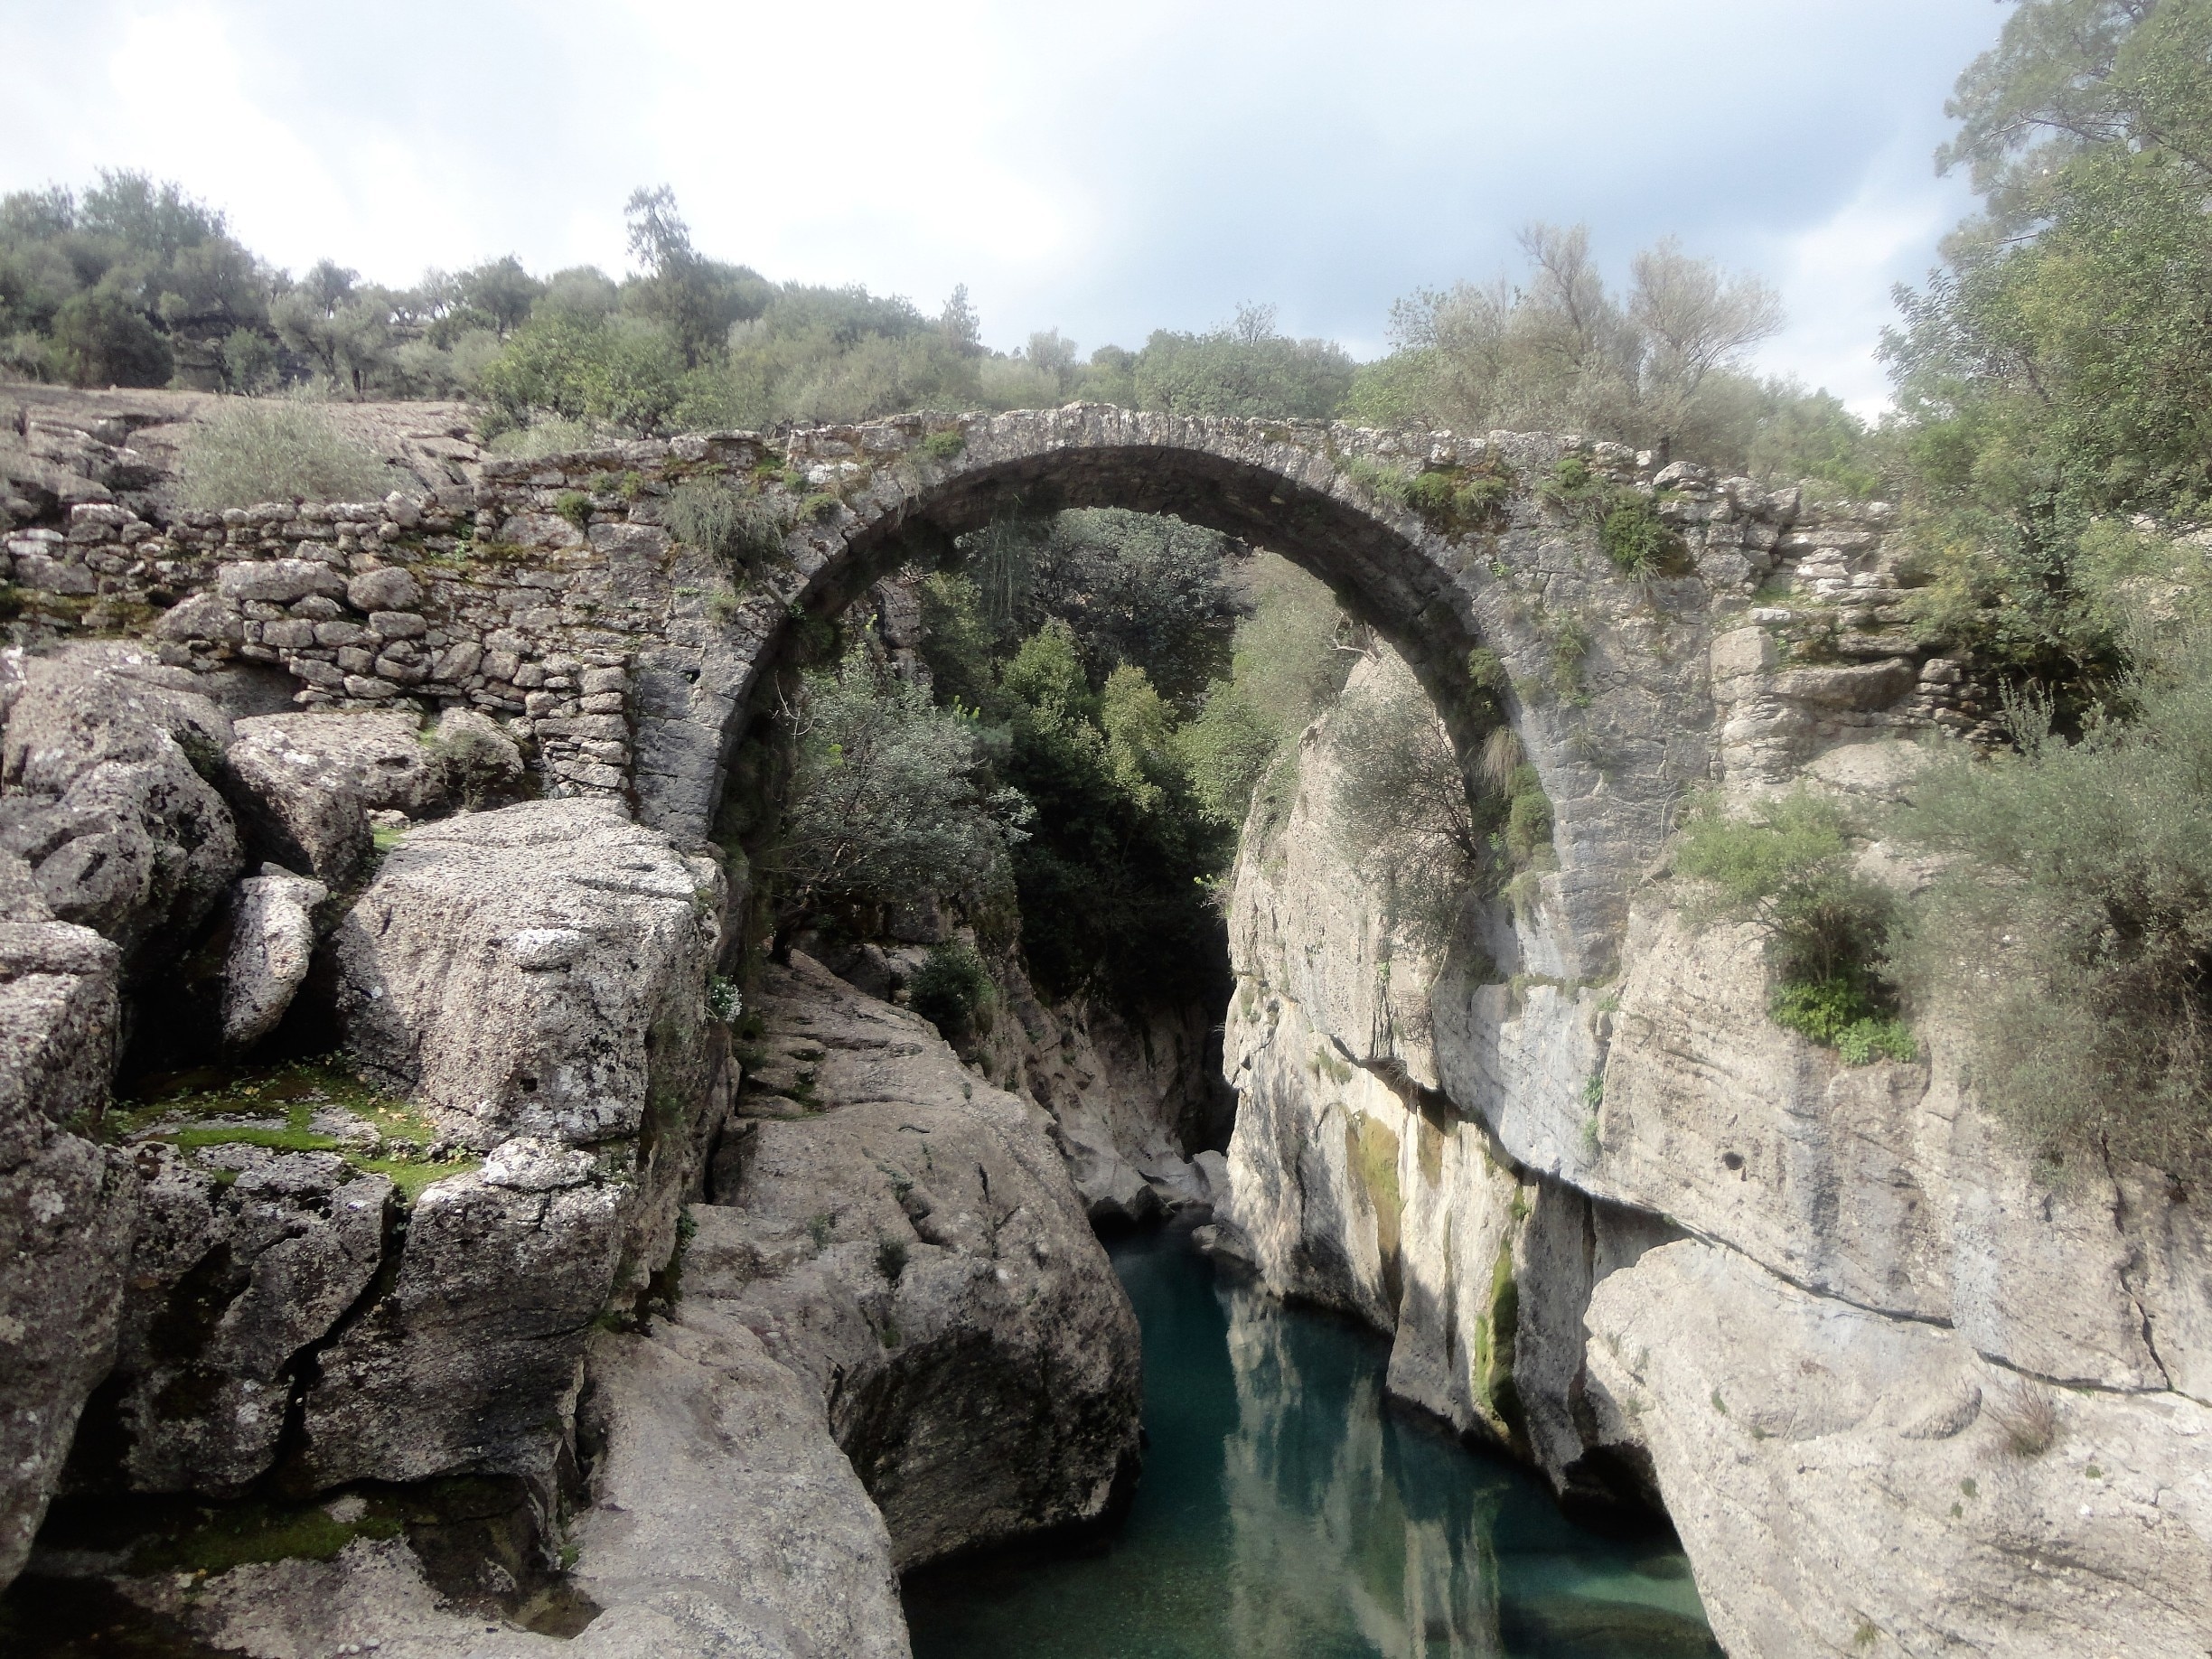 A wonderful old #bridge and magnificent coloured water. Beautiful scenic spot tucked away, a short drive into the #Mountains. This is only a #footbridge, not for Vehicles in #Turkey #Antalya #KopruluKaynon #green #lifeatexpedia
#waterlust #stunningstructure #Parks  #aboveitall #History